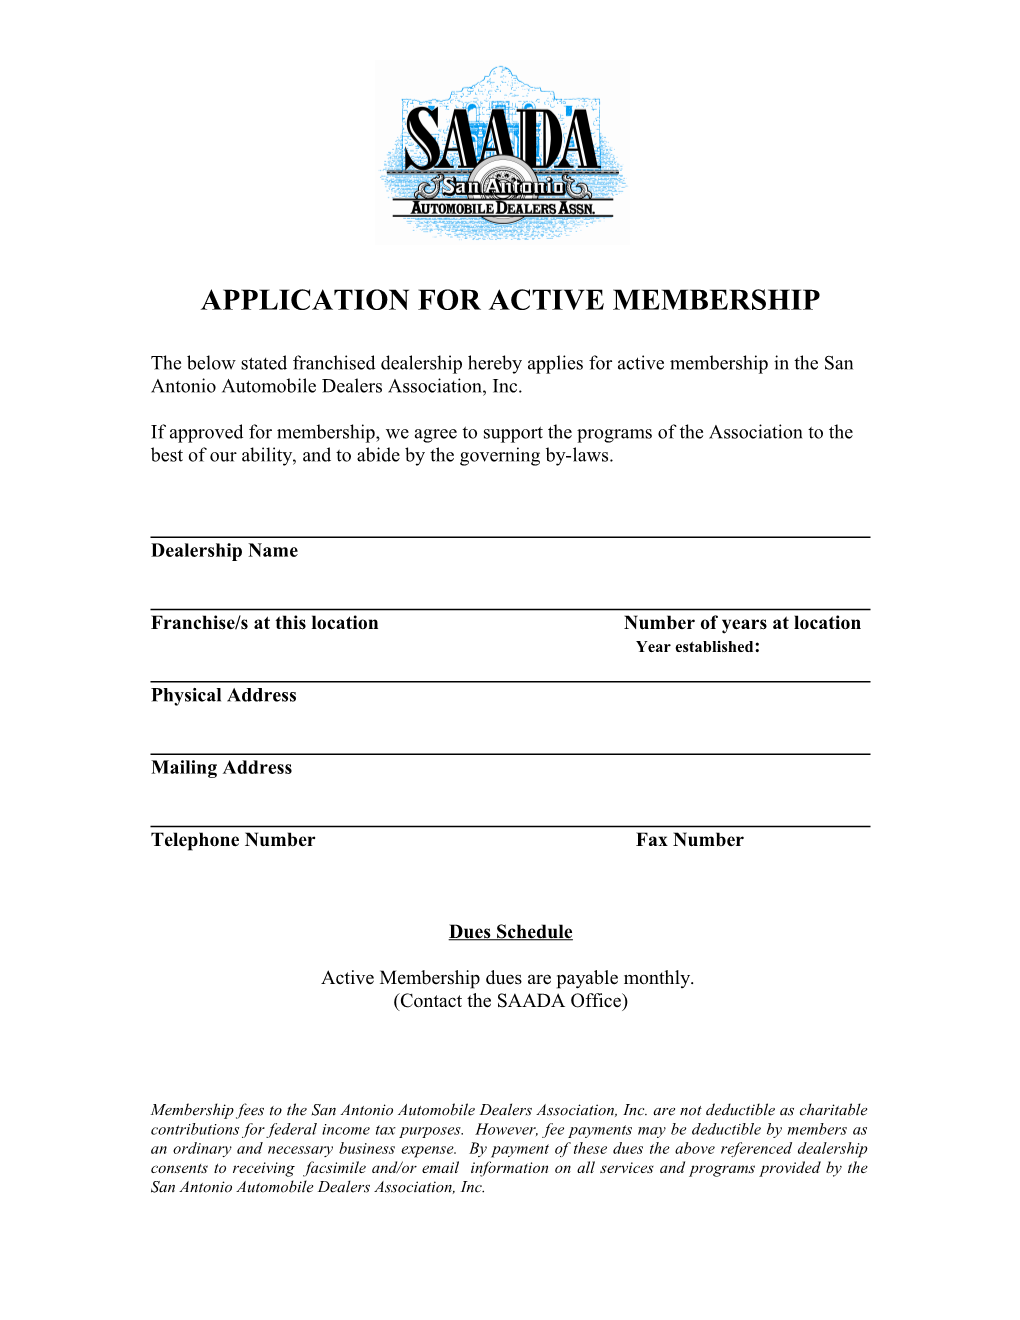 Application for Active Membership